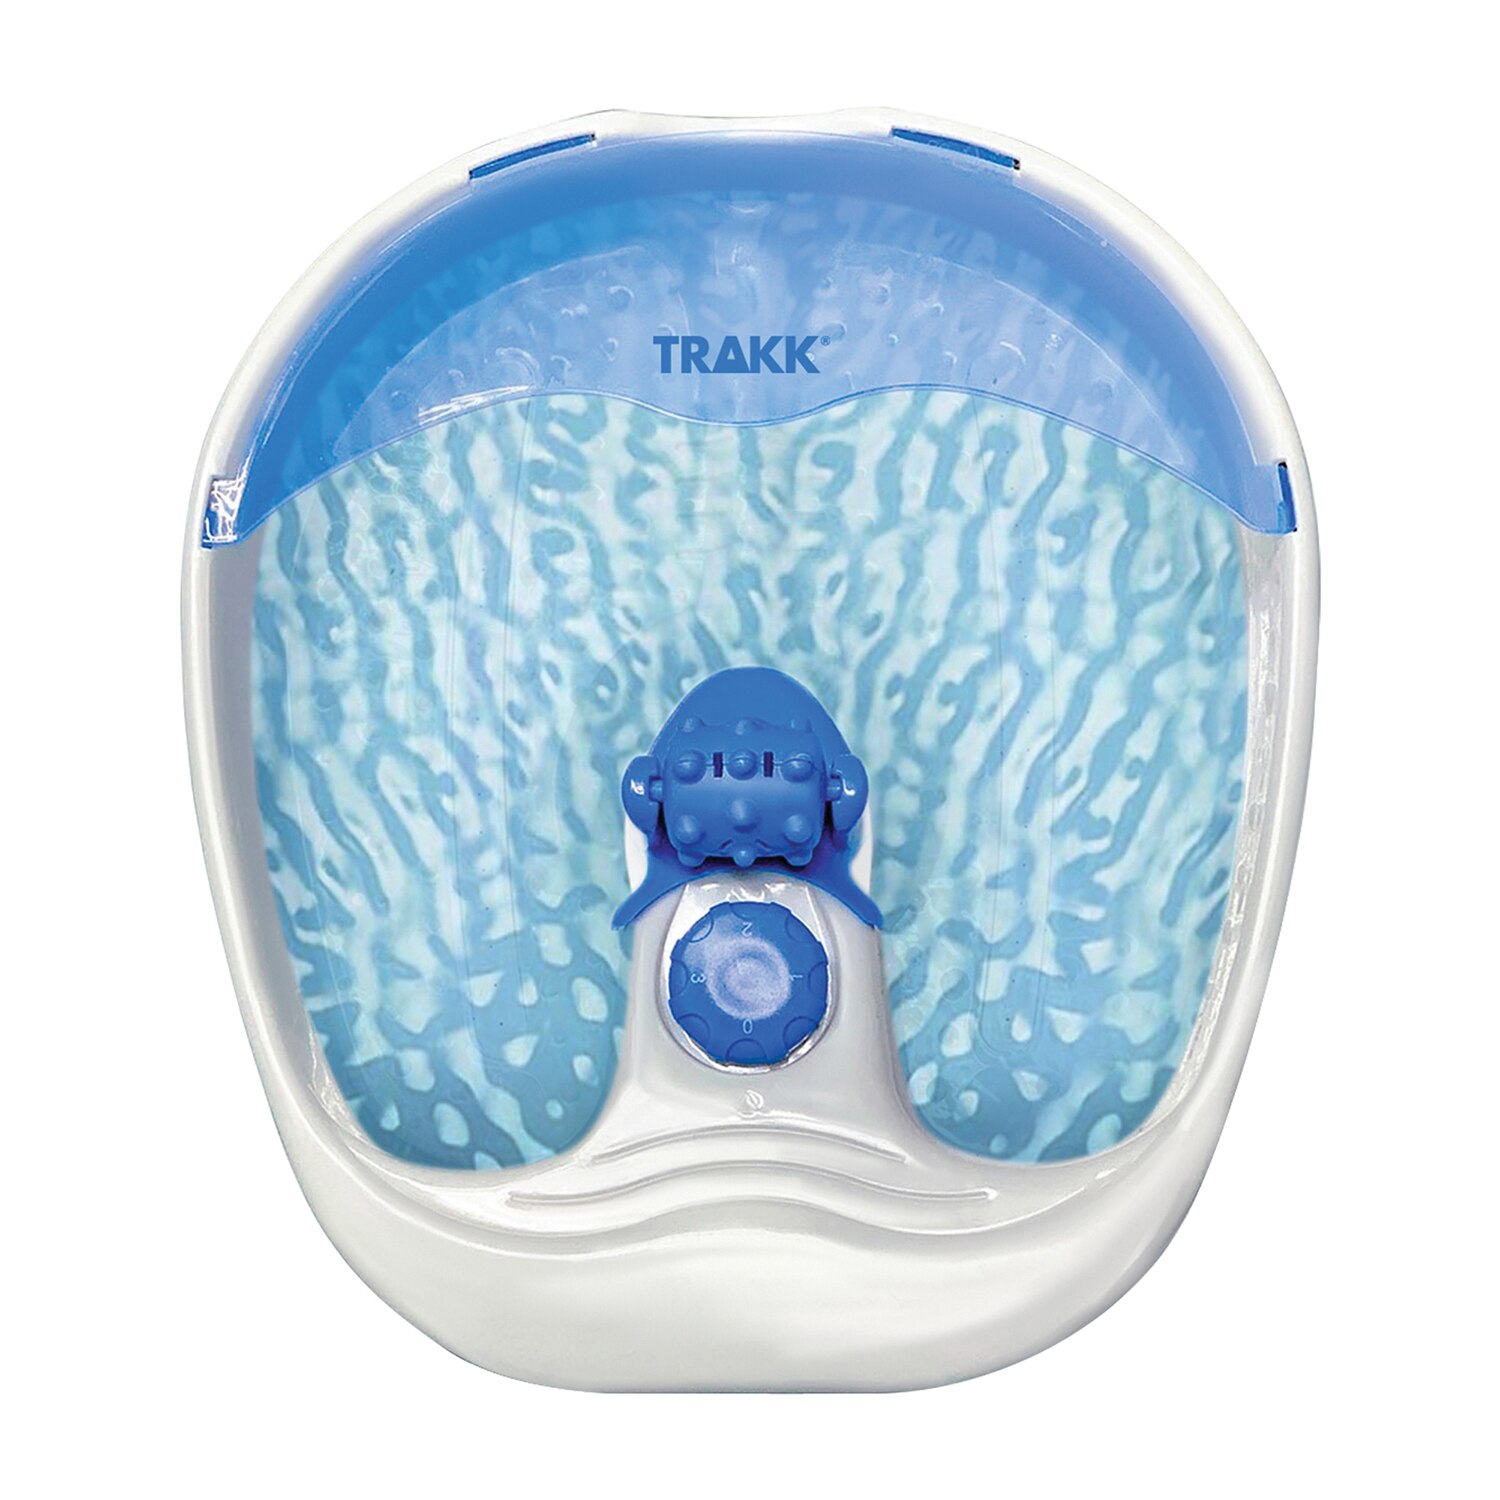 TRAKK Foot Spa Massager With Vibrating Bubbles And Heating Function , CVS